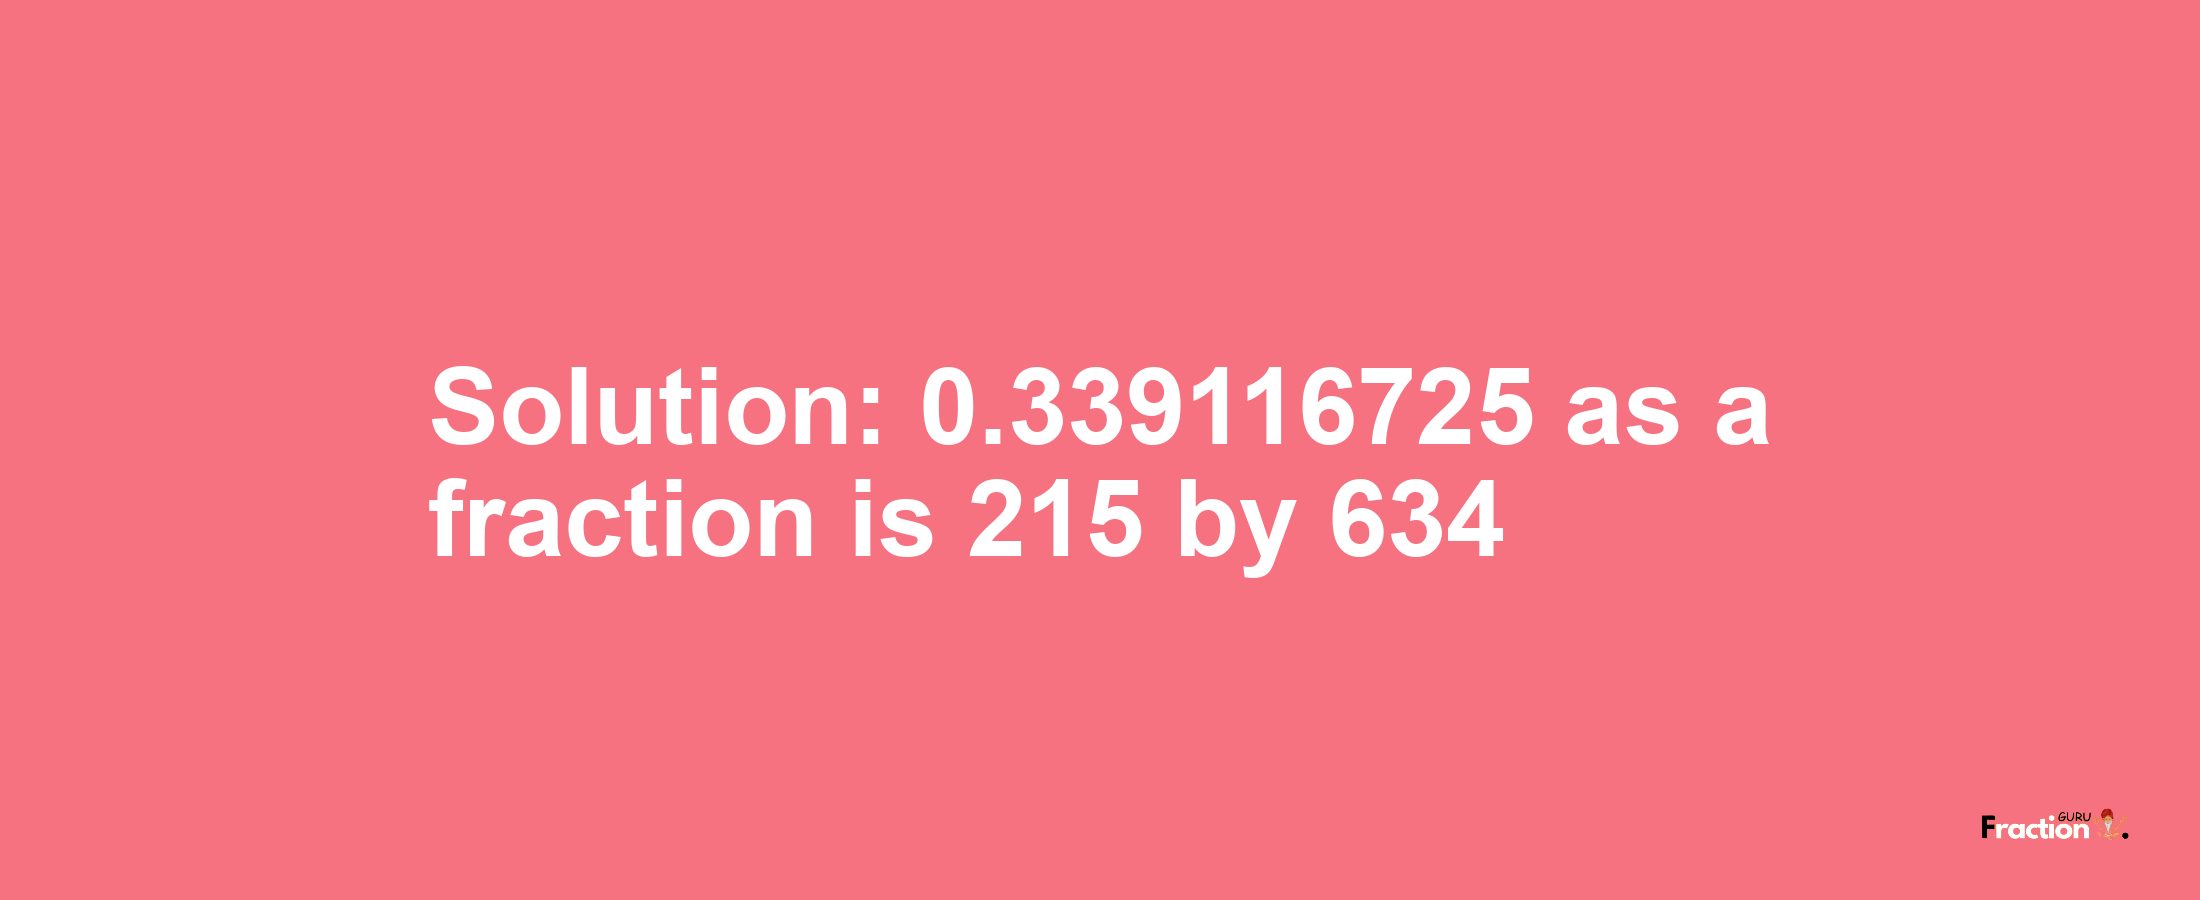 Solution:0.339116725 as a fraction is 215/634